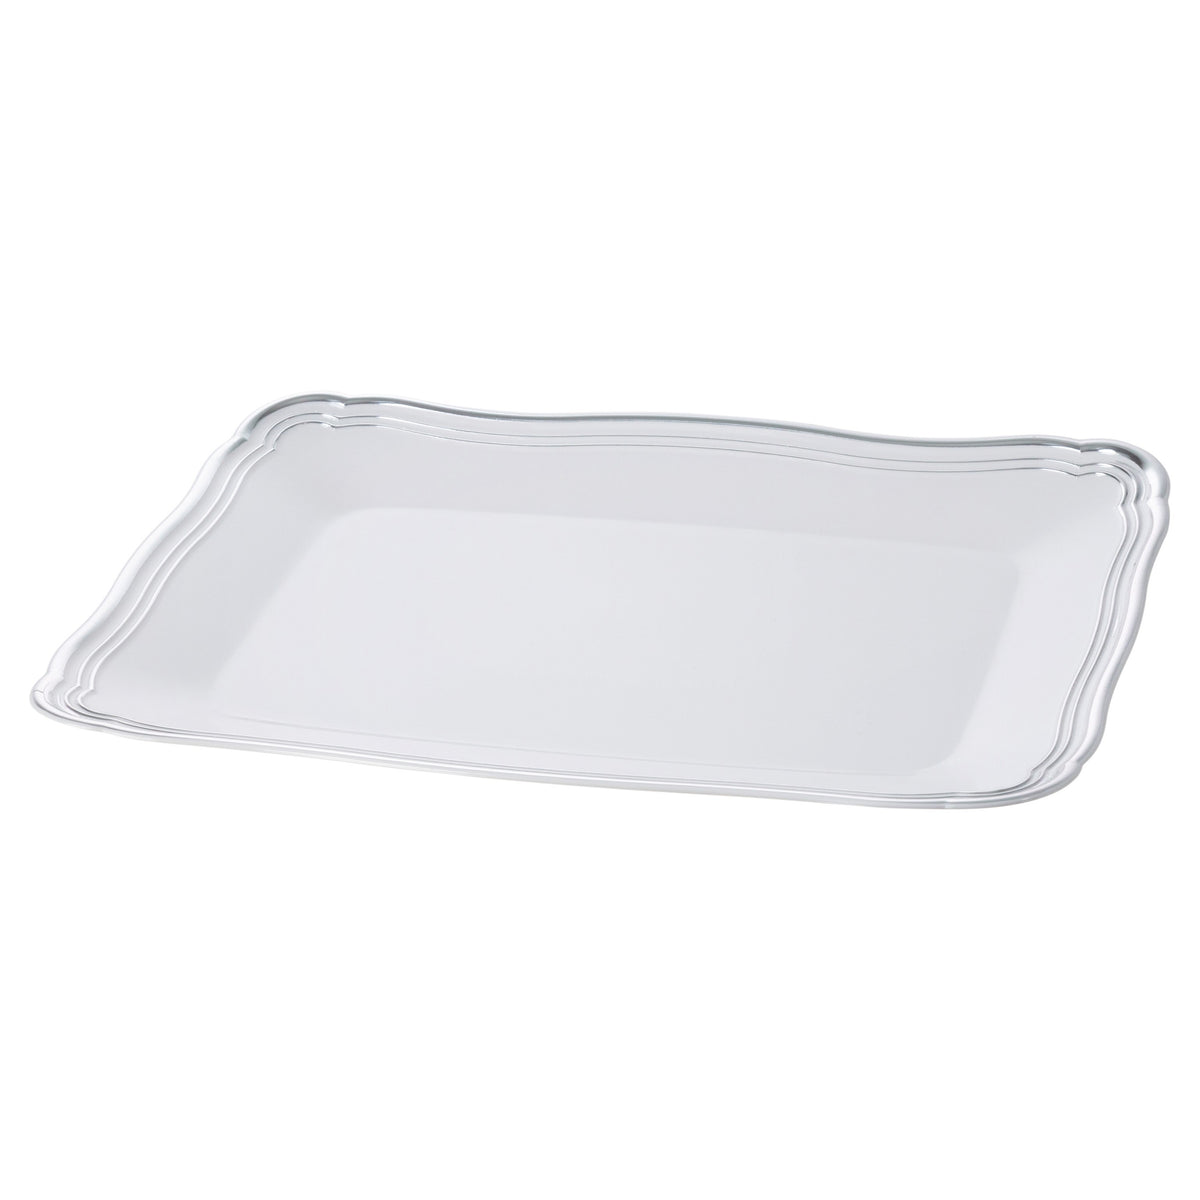 9 X 13 Inch Rectangle White And Gold Rim Plastic Serving Tray